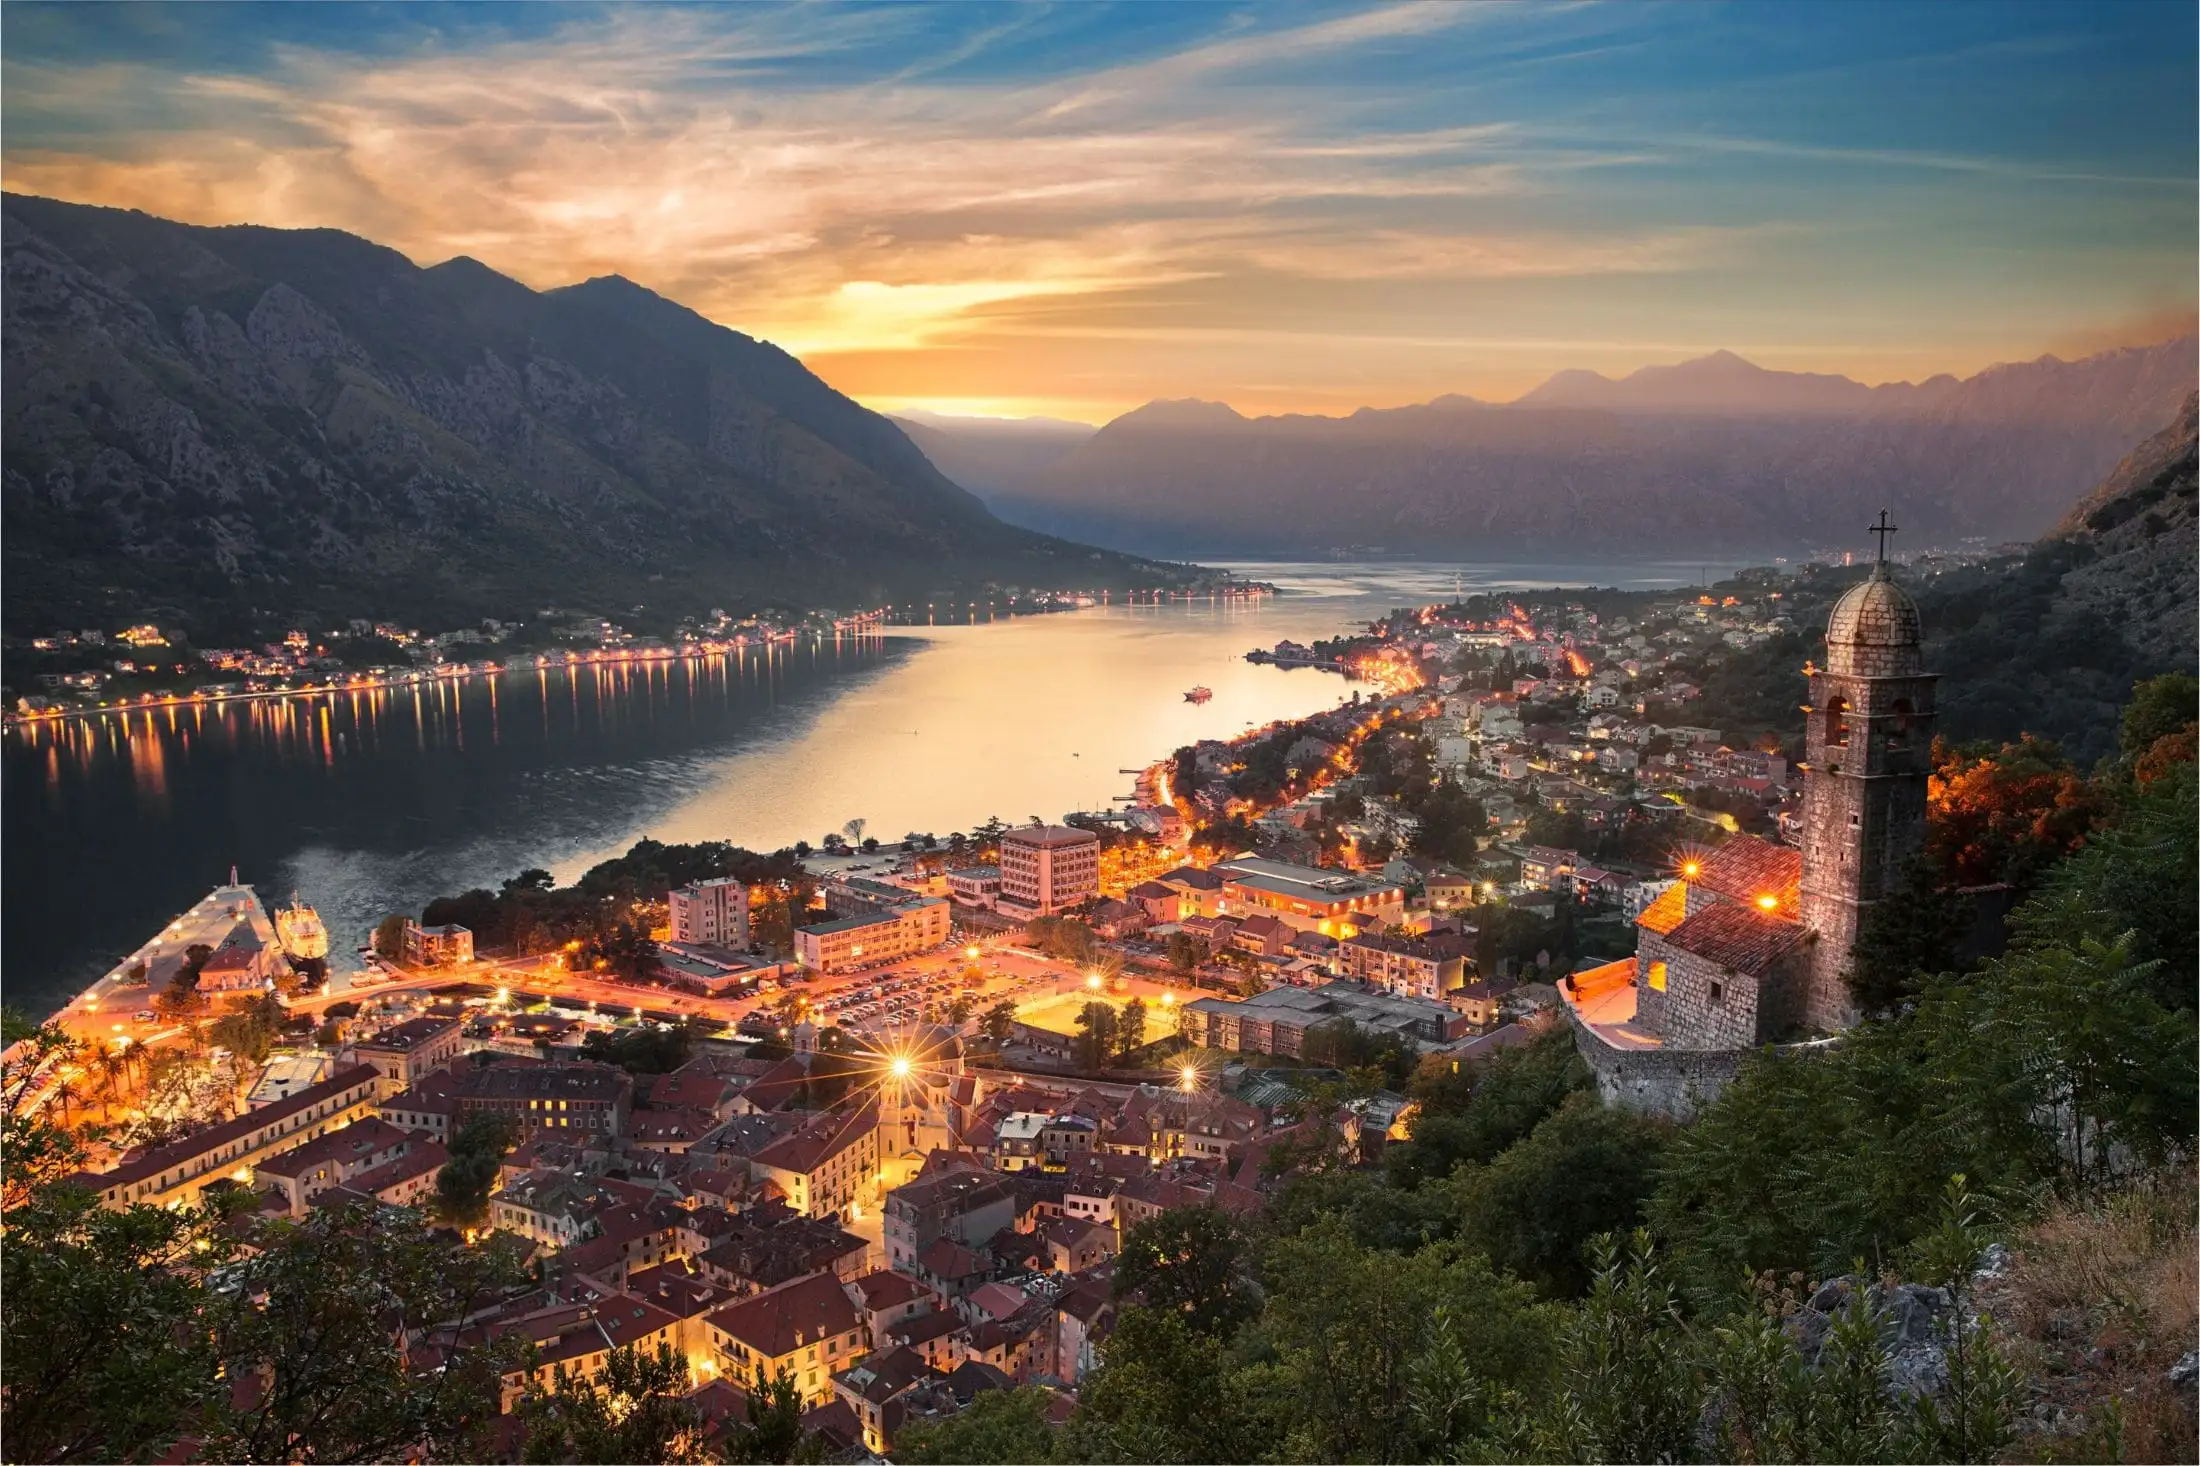 A photo of the cultural capital of Montenegro - Kotor